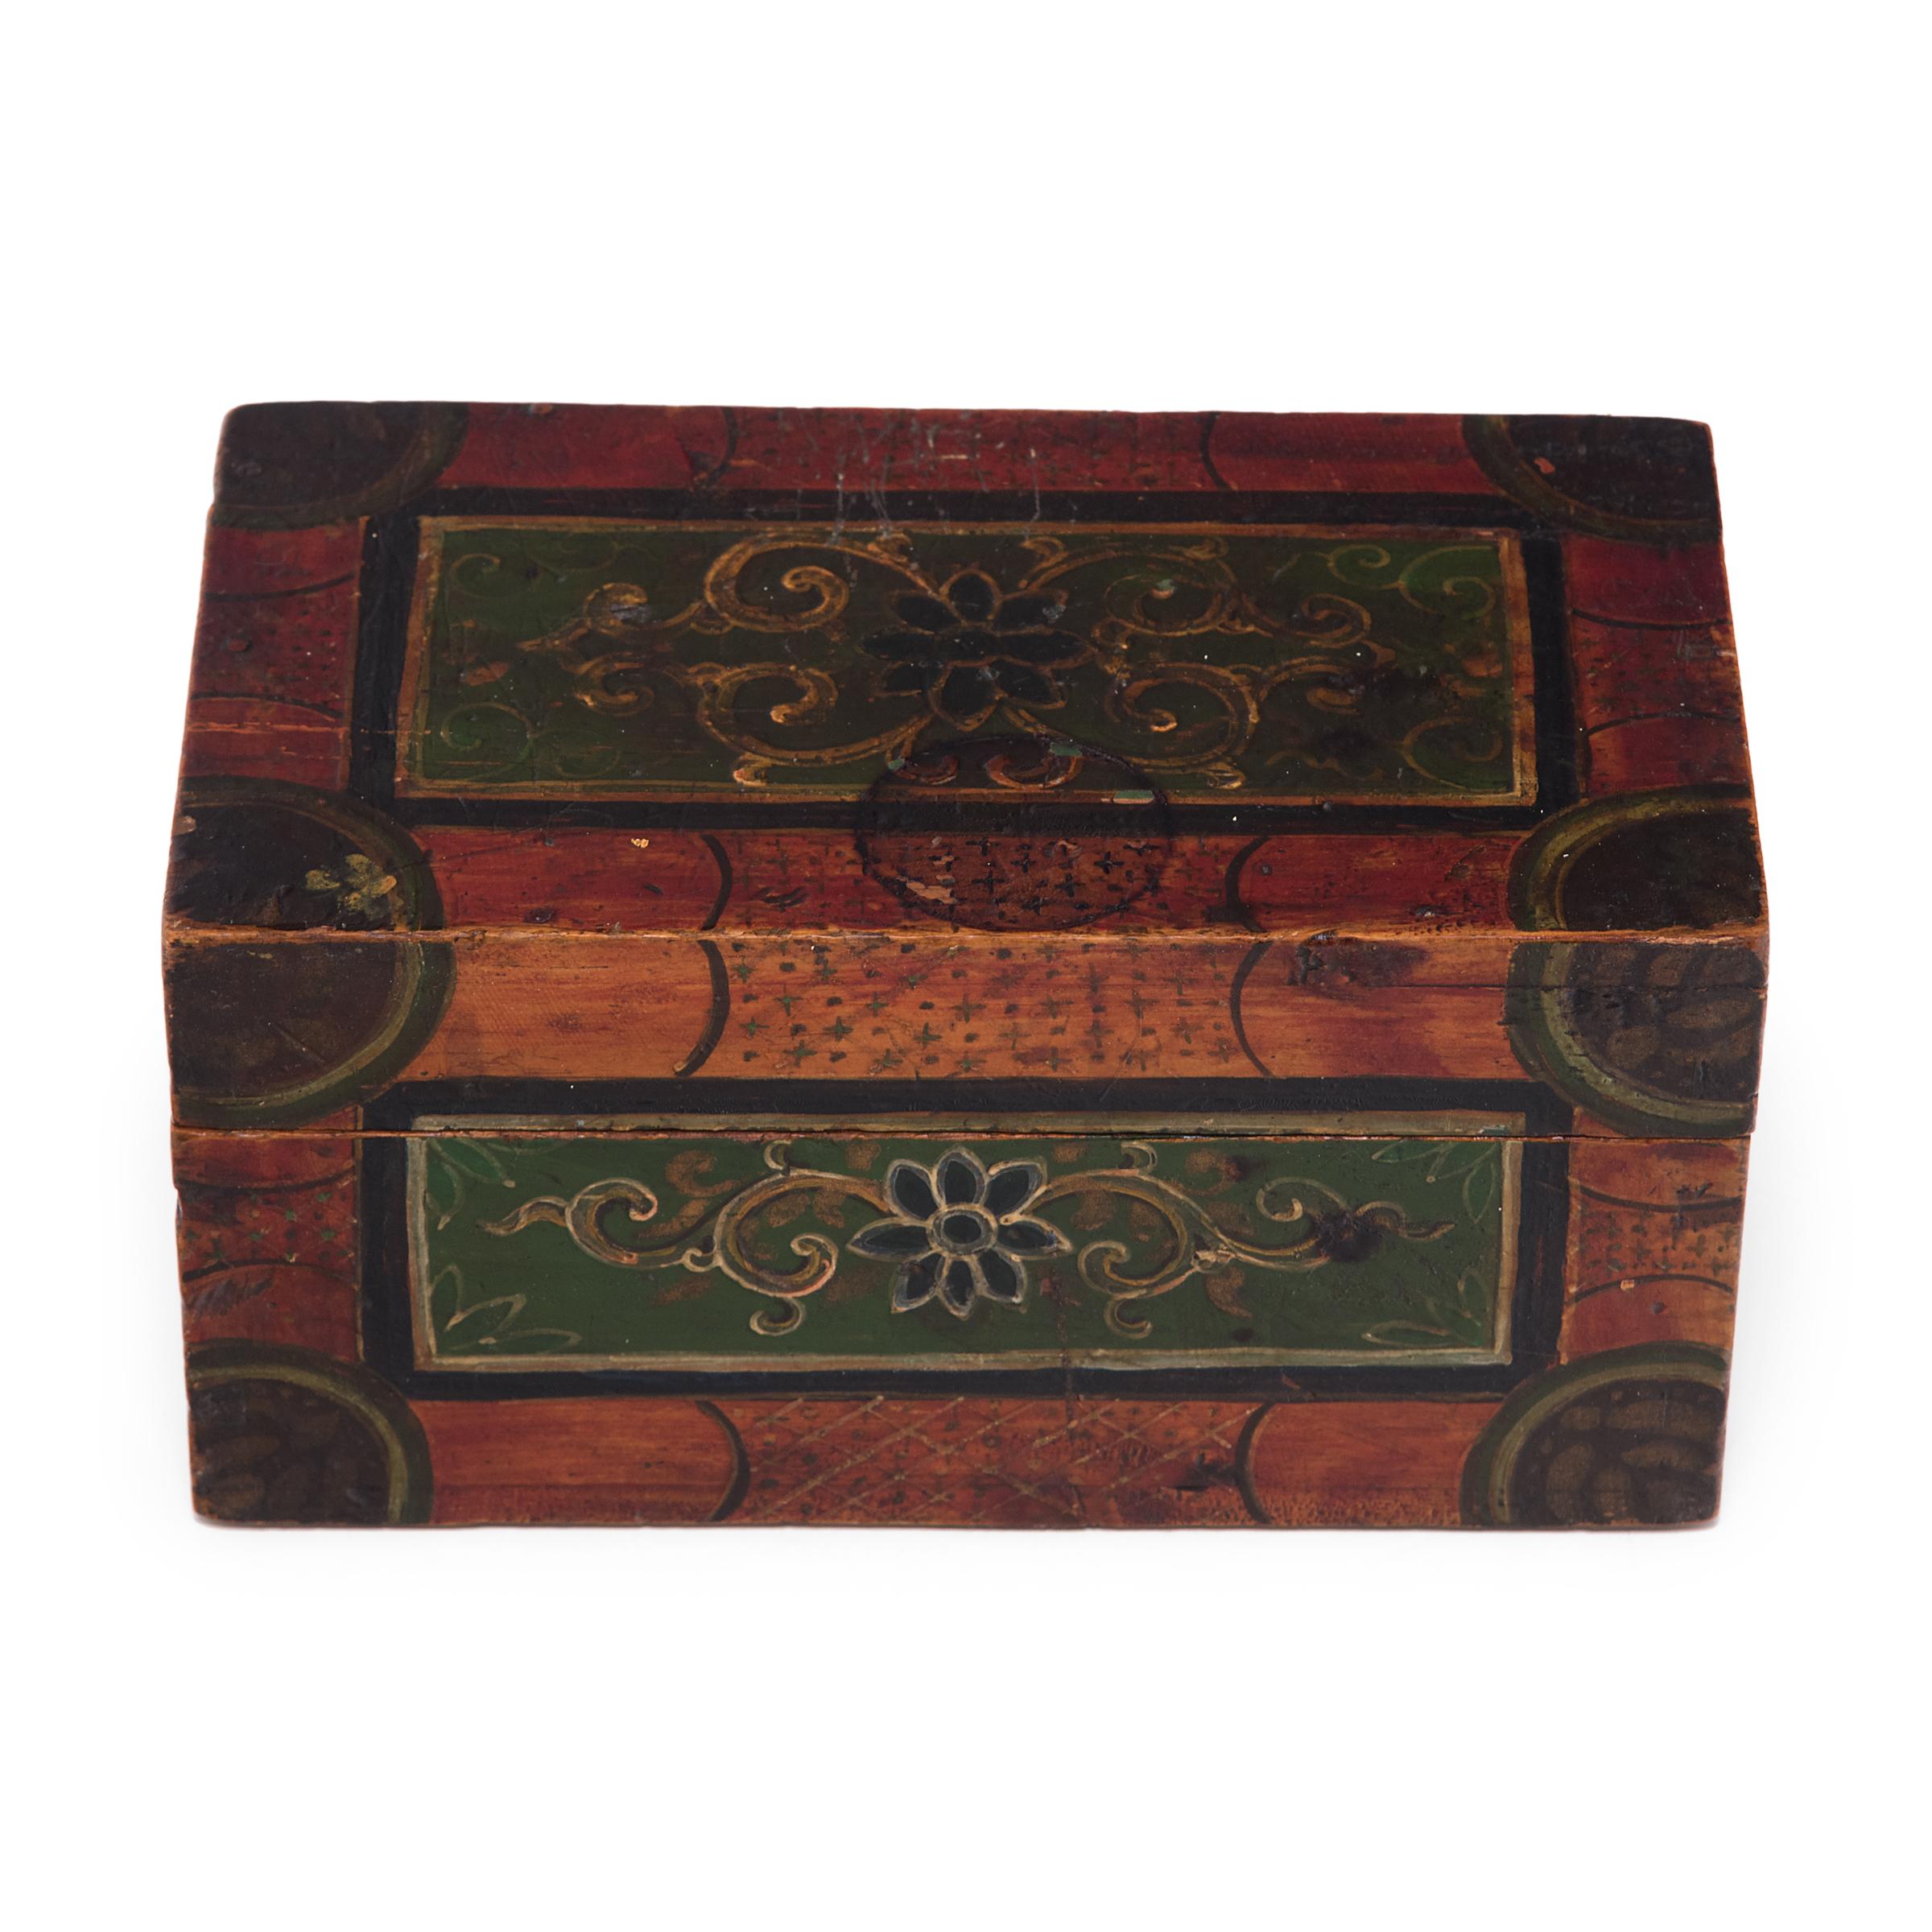 Hand-Painted Floral Painted Treasure Box